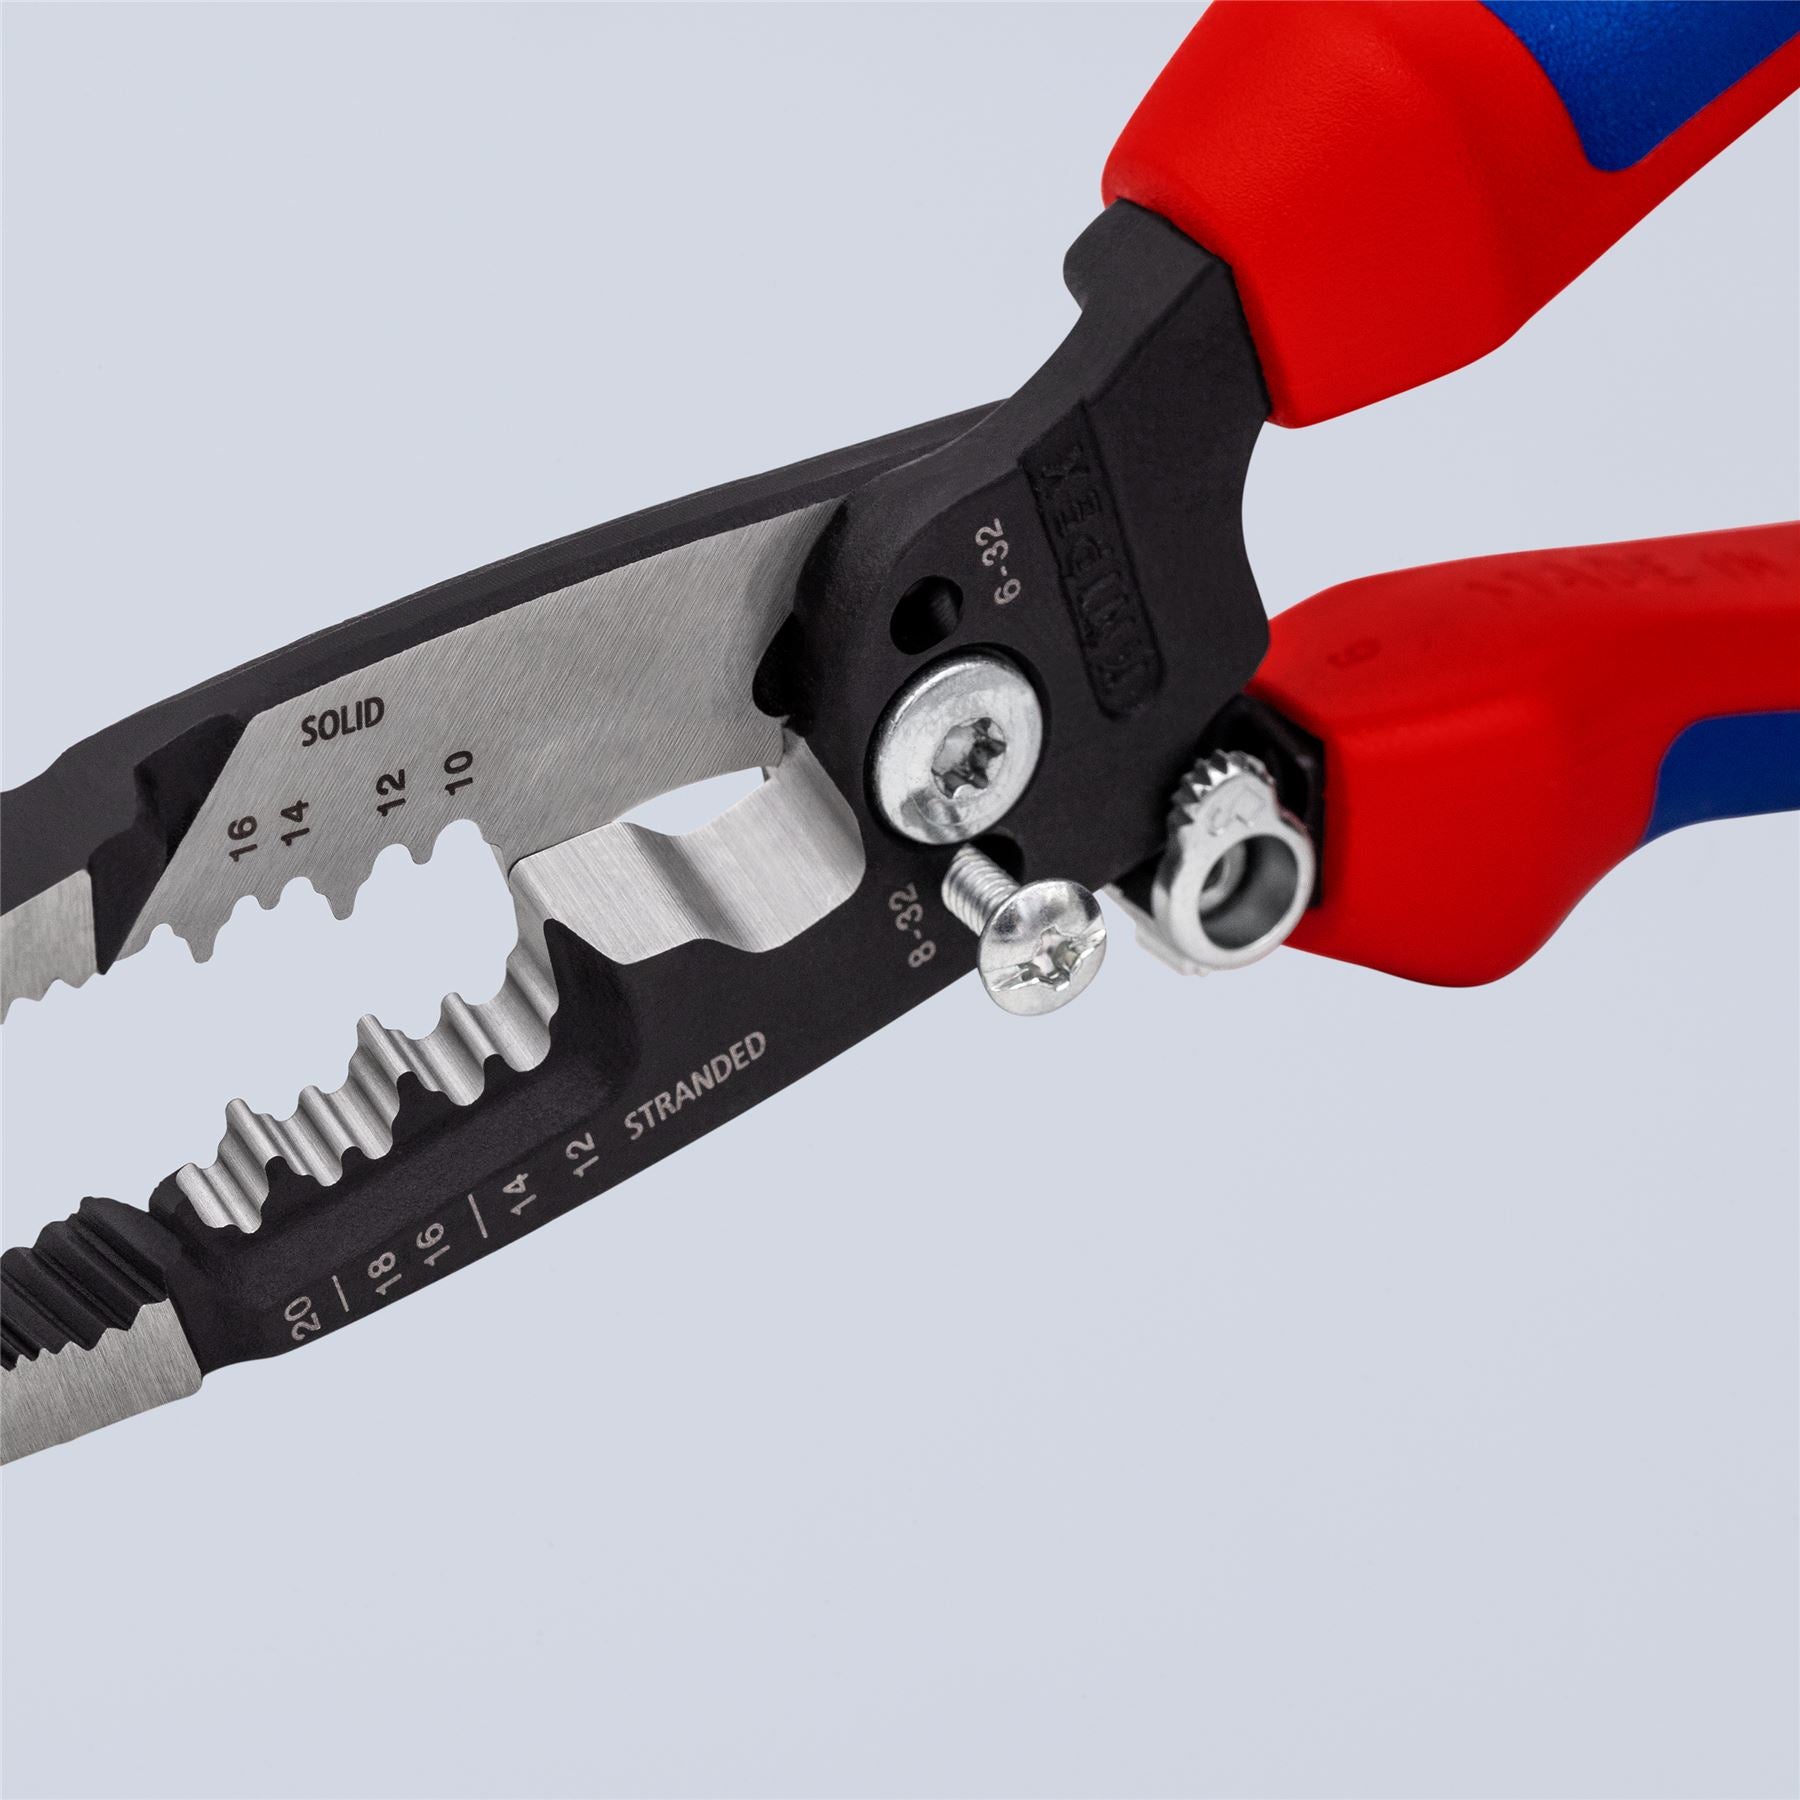 Knipex Wire Stripper Multifunction Electrician Pliers American Style Multi Component Grips 13 72 8